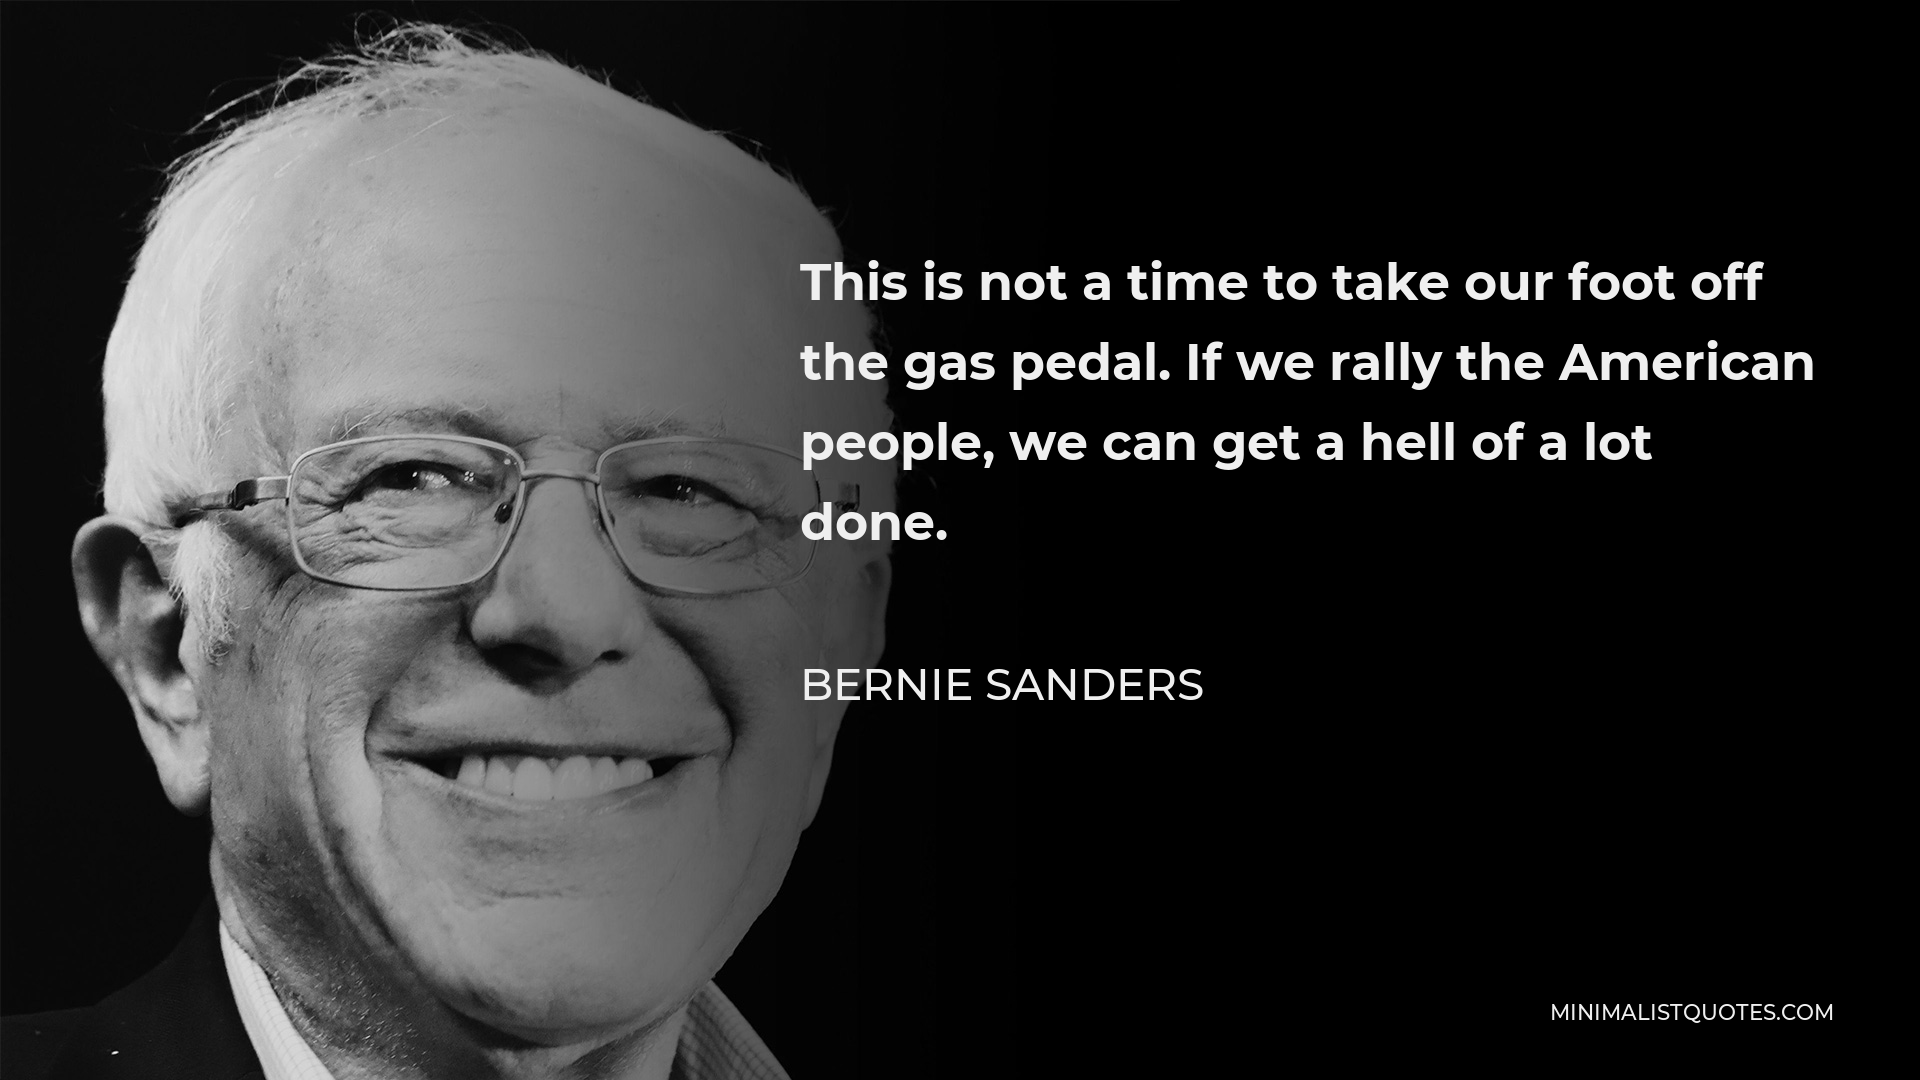 Bernie Sanders Quote - This is not a time to take our foot off the gas pedal. If we rally the American people, we can get a hell of a lot done.